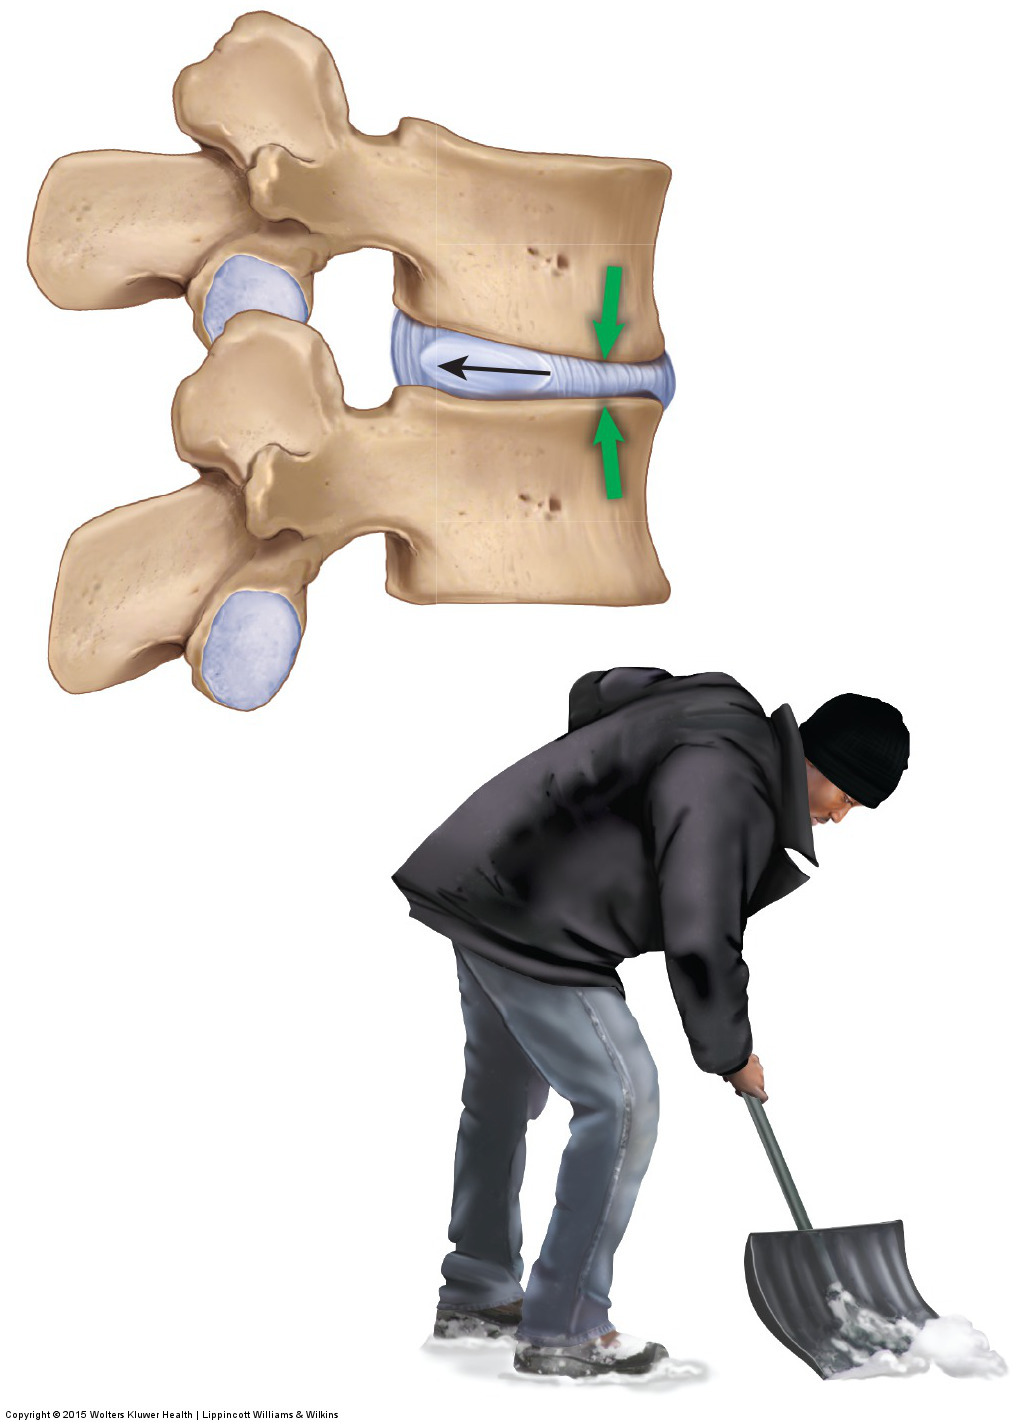 Flexion drives the nucleus pulposus posteriorly against the annulus fibrosus of the disc. Permission: Joseph E. Muscolino. Manual Therapy for the Low Back and Pelvis (2015).